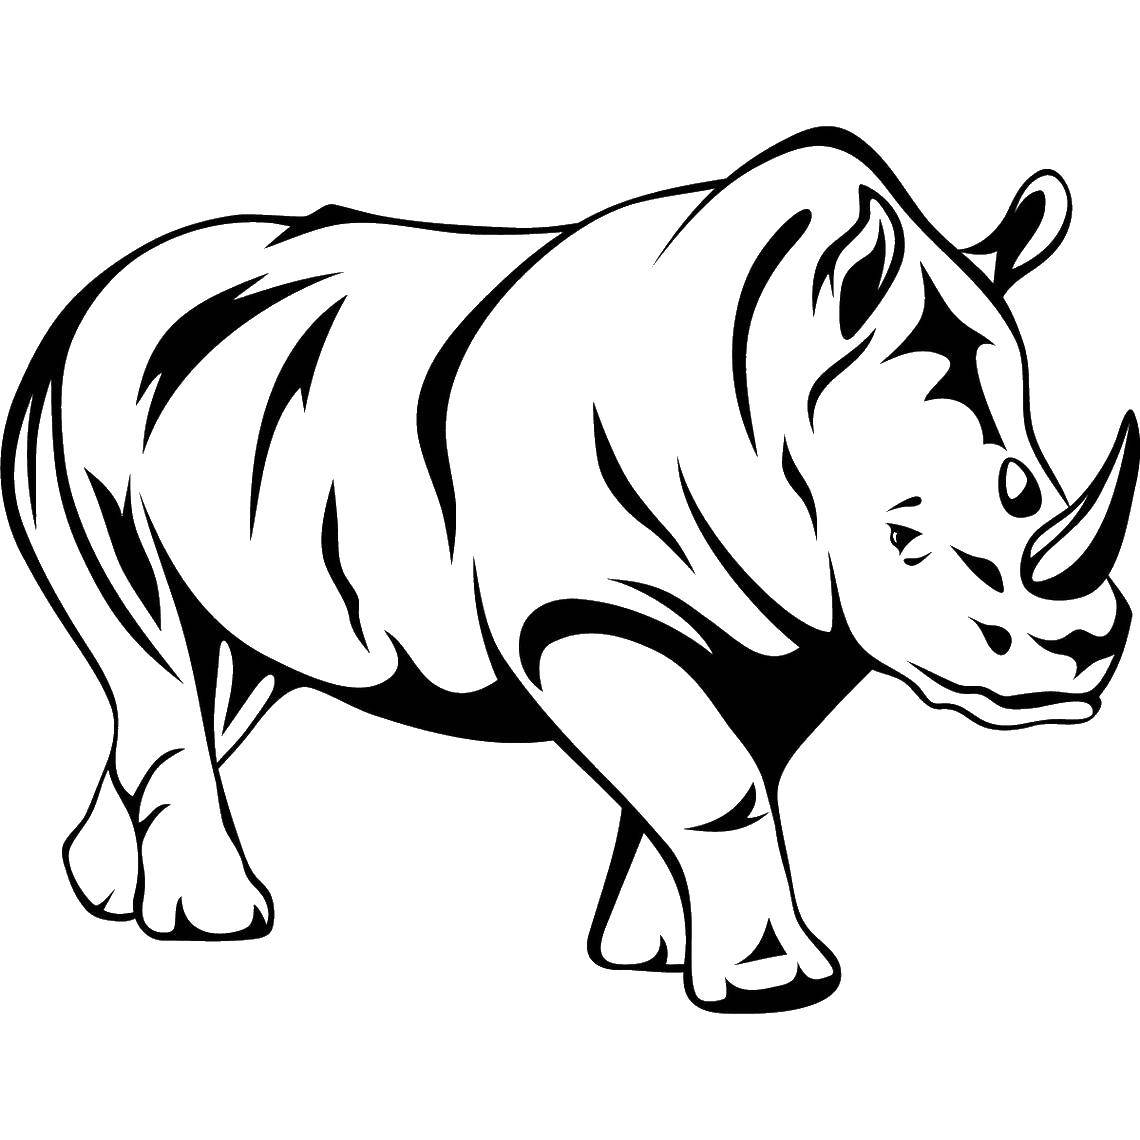 Coloring Rhino. Category Animals. Tags:  animals, Rhino, horn.